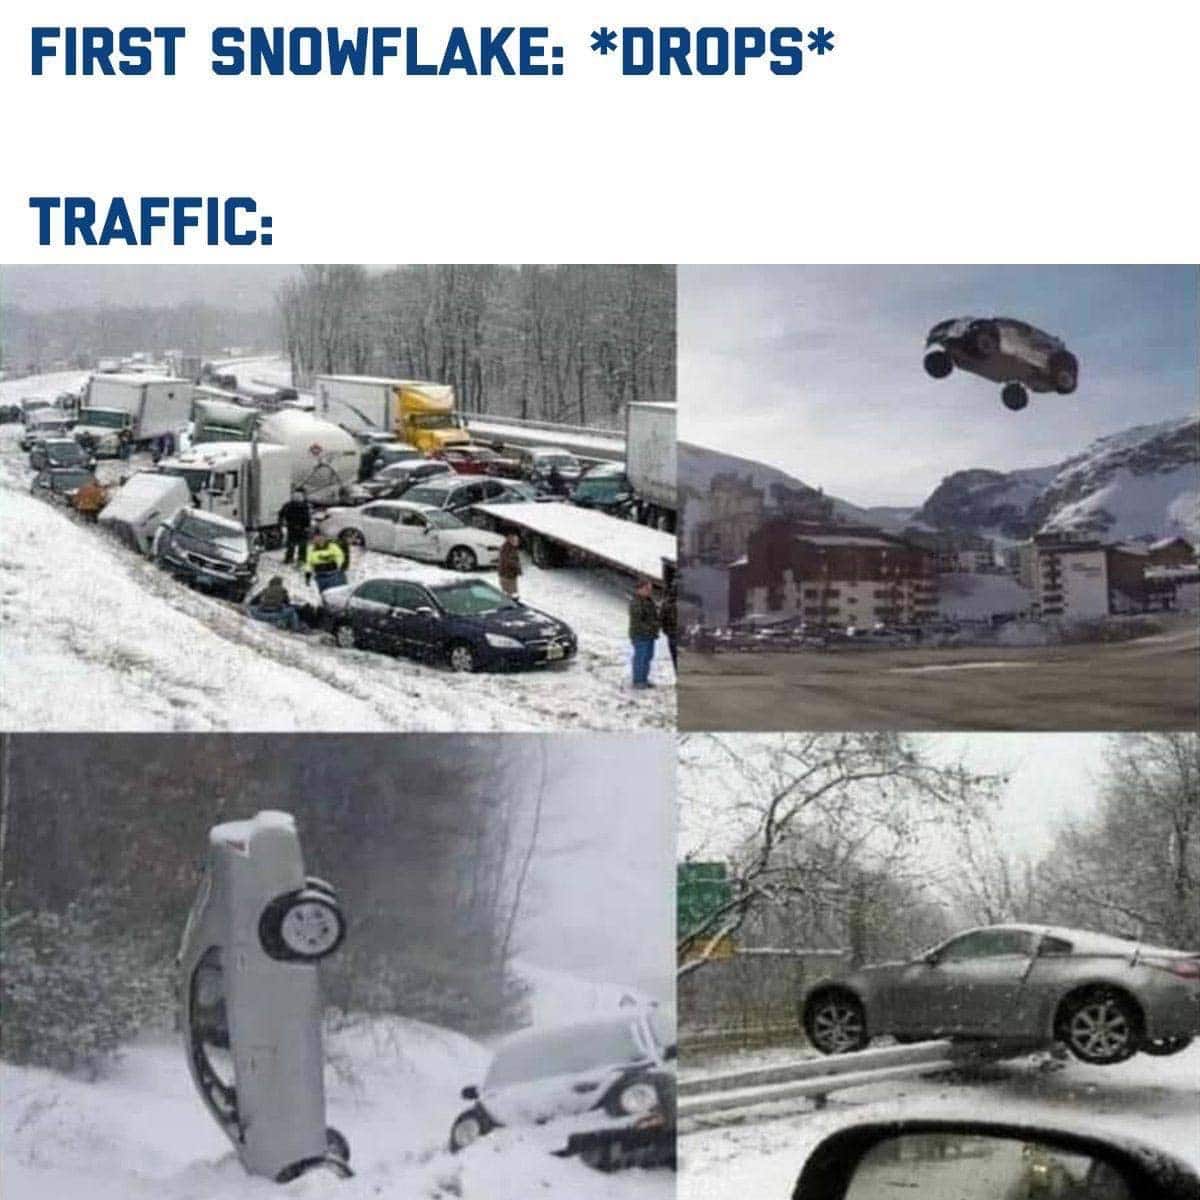 several photos of car accidents in progress in snowy weather with the text "first snowflake drops, traffic:"